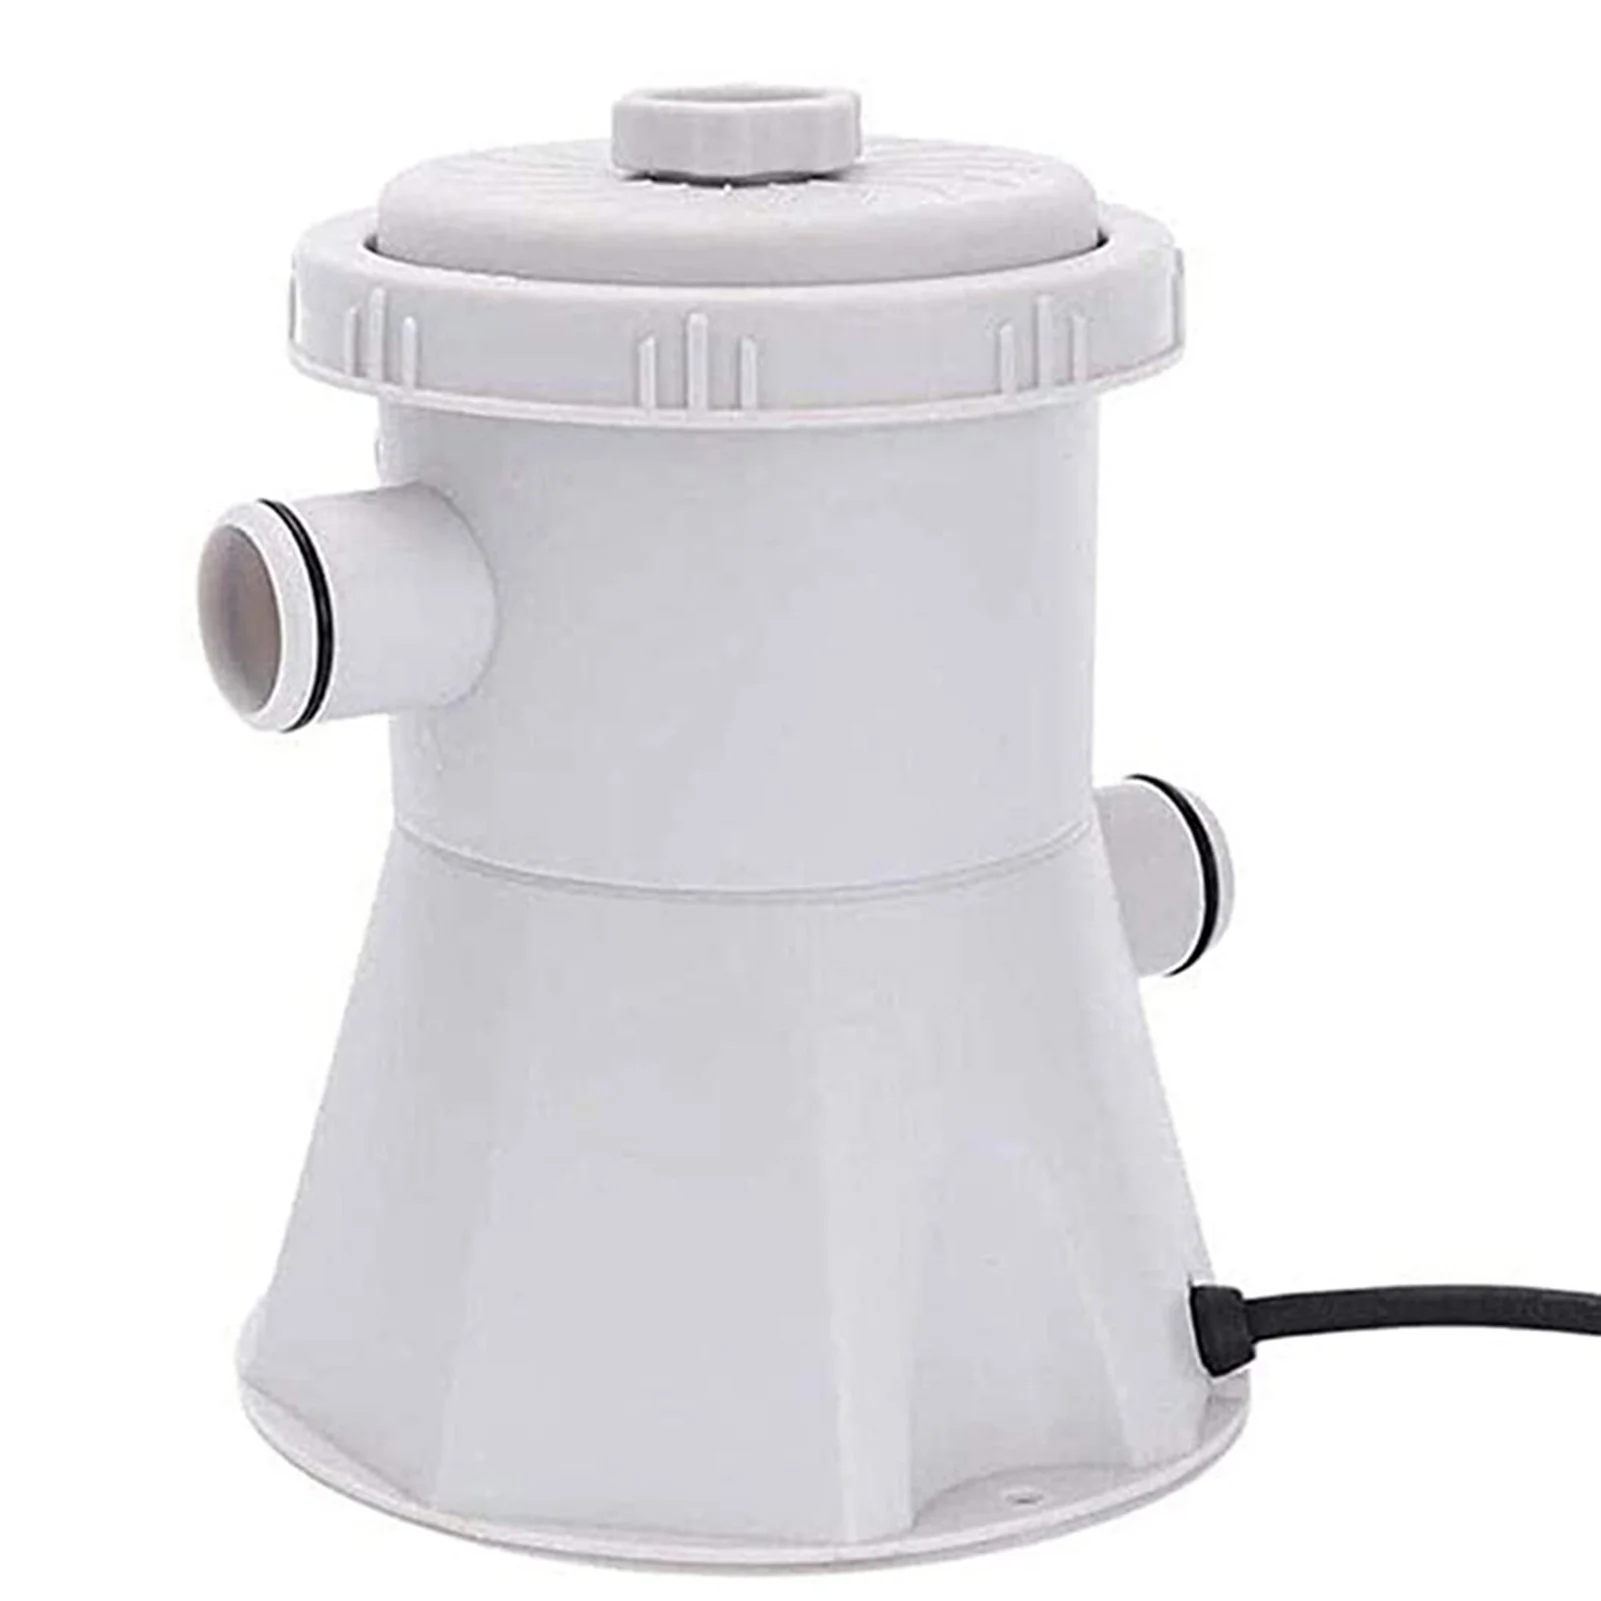 

Cartridge Pool Filters Pump Easy Installation Swimming Pool Filter Pump for Above Ground Pools SNO88